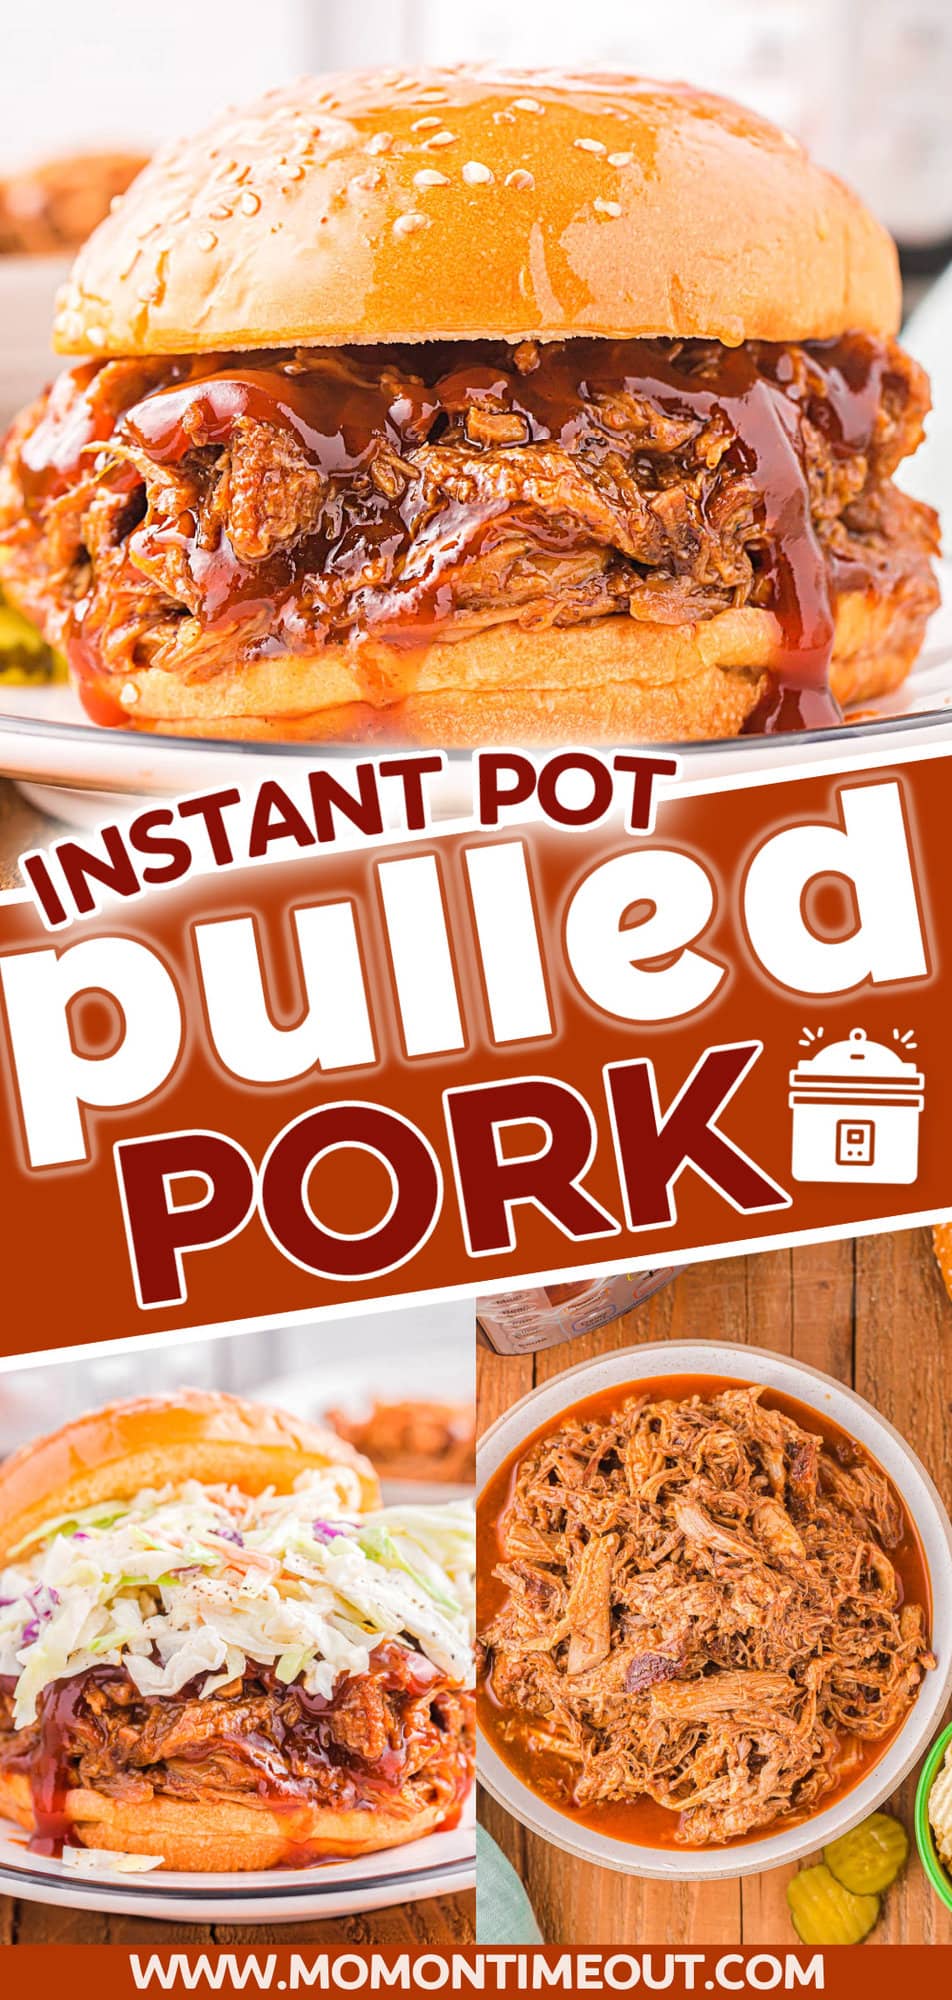 Instant Pot Pulled Pork Recipe - Mom On Timeout